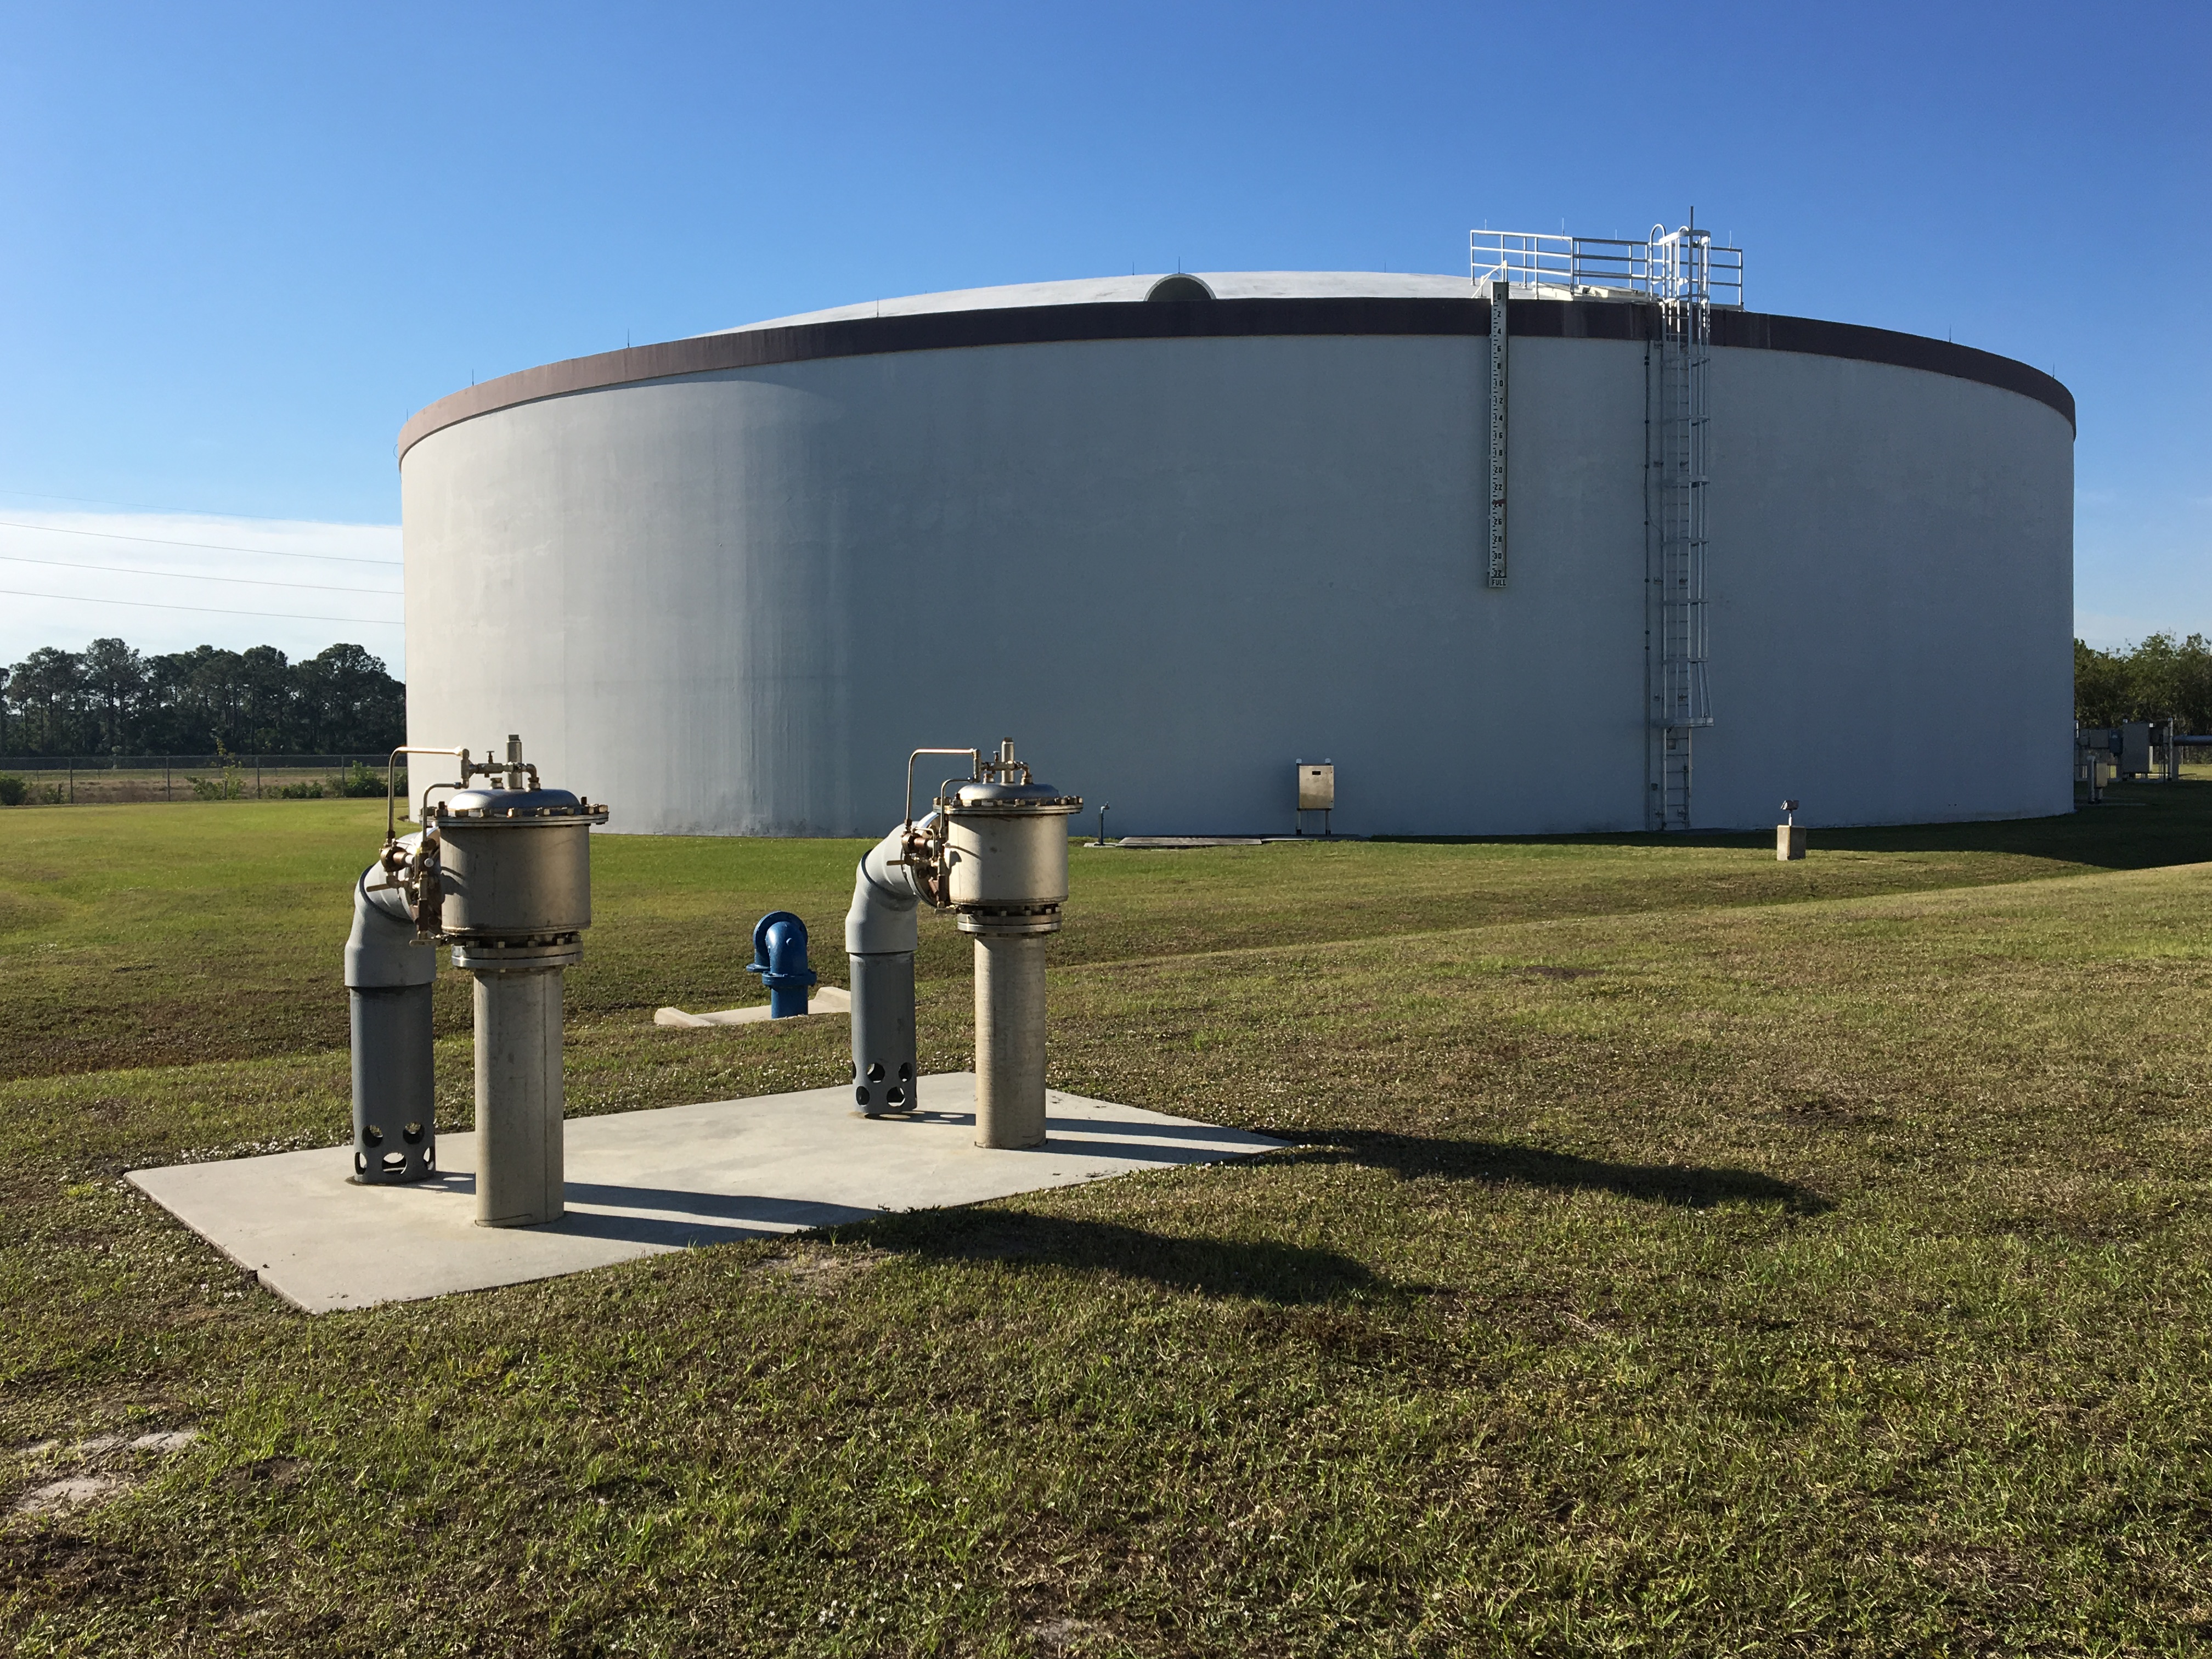 Exterior of 4-million gallon water storage tank at James E. Anderson Water Treatment Facility